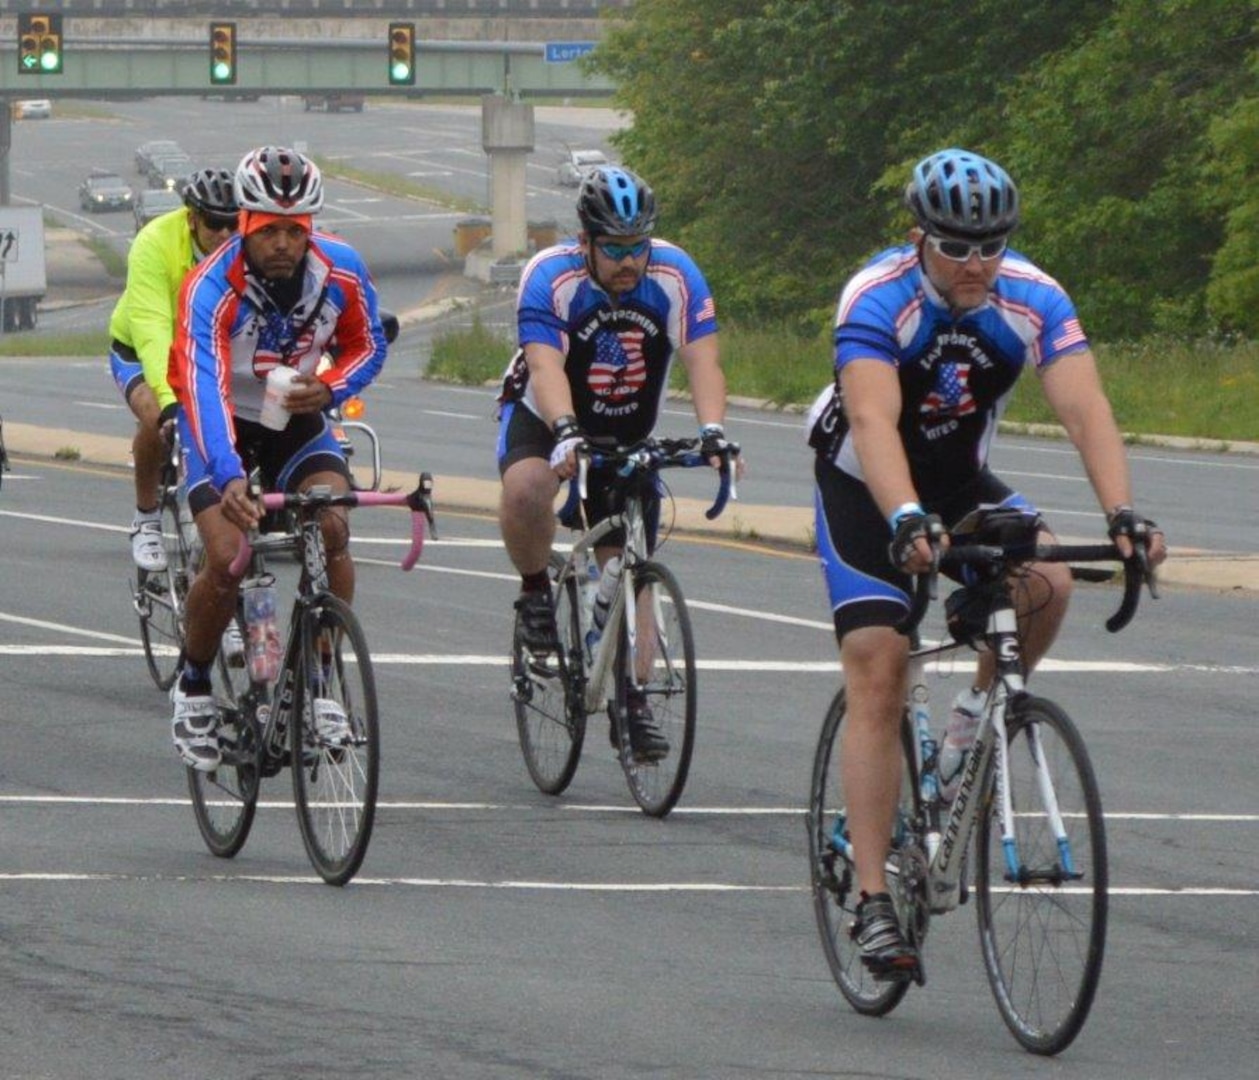 DLA Police Staff Sgt. James Sprecher, second from right, rides for charity in the Law Enforcement United “Road to Hope Memorial Bicycle Ride” May 10-12, 2016.